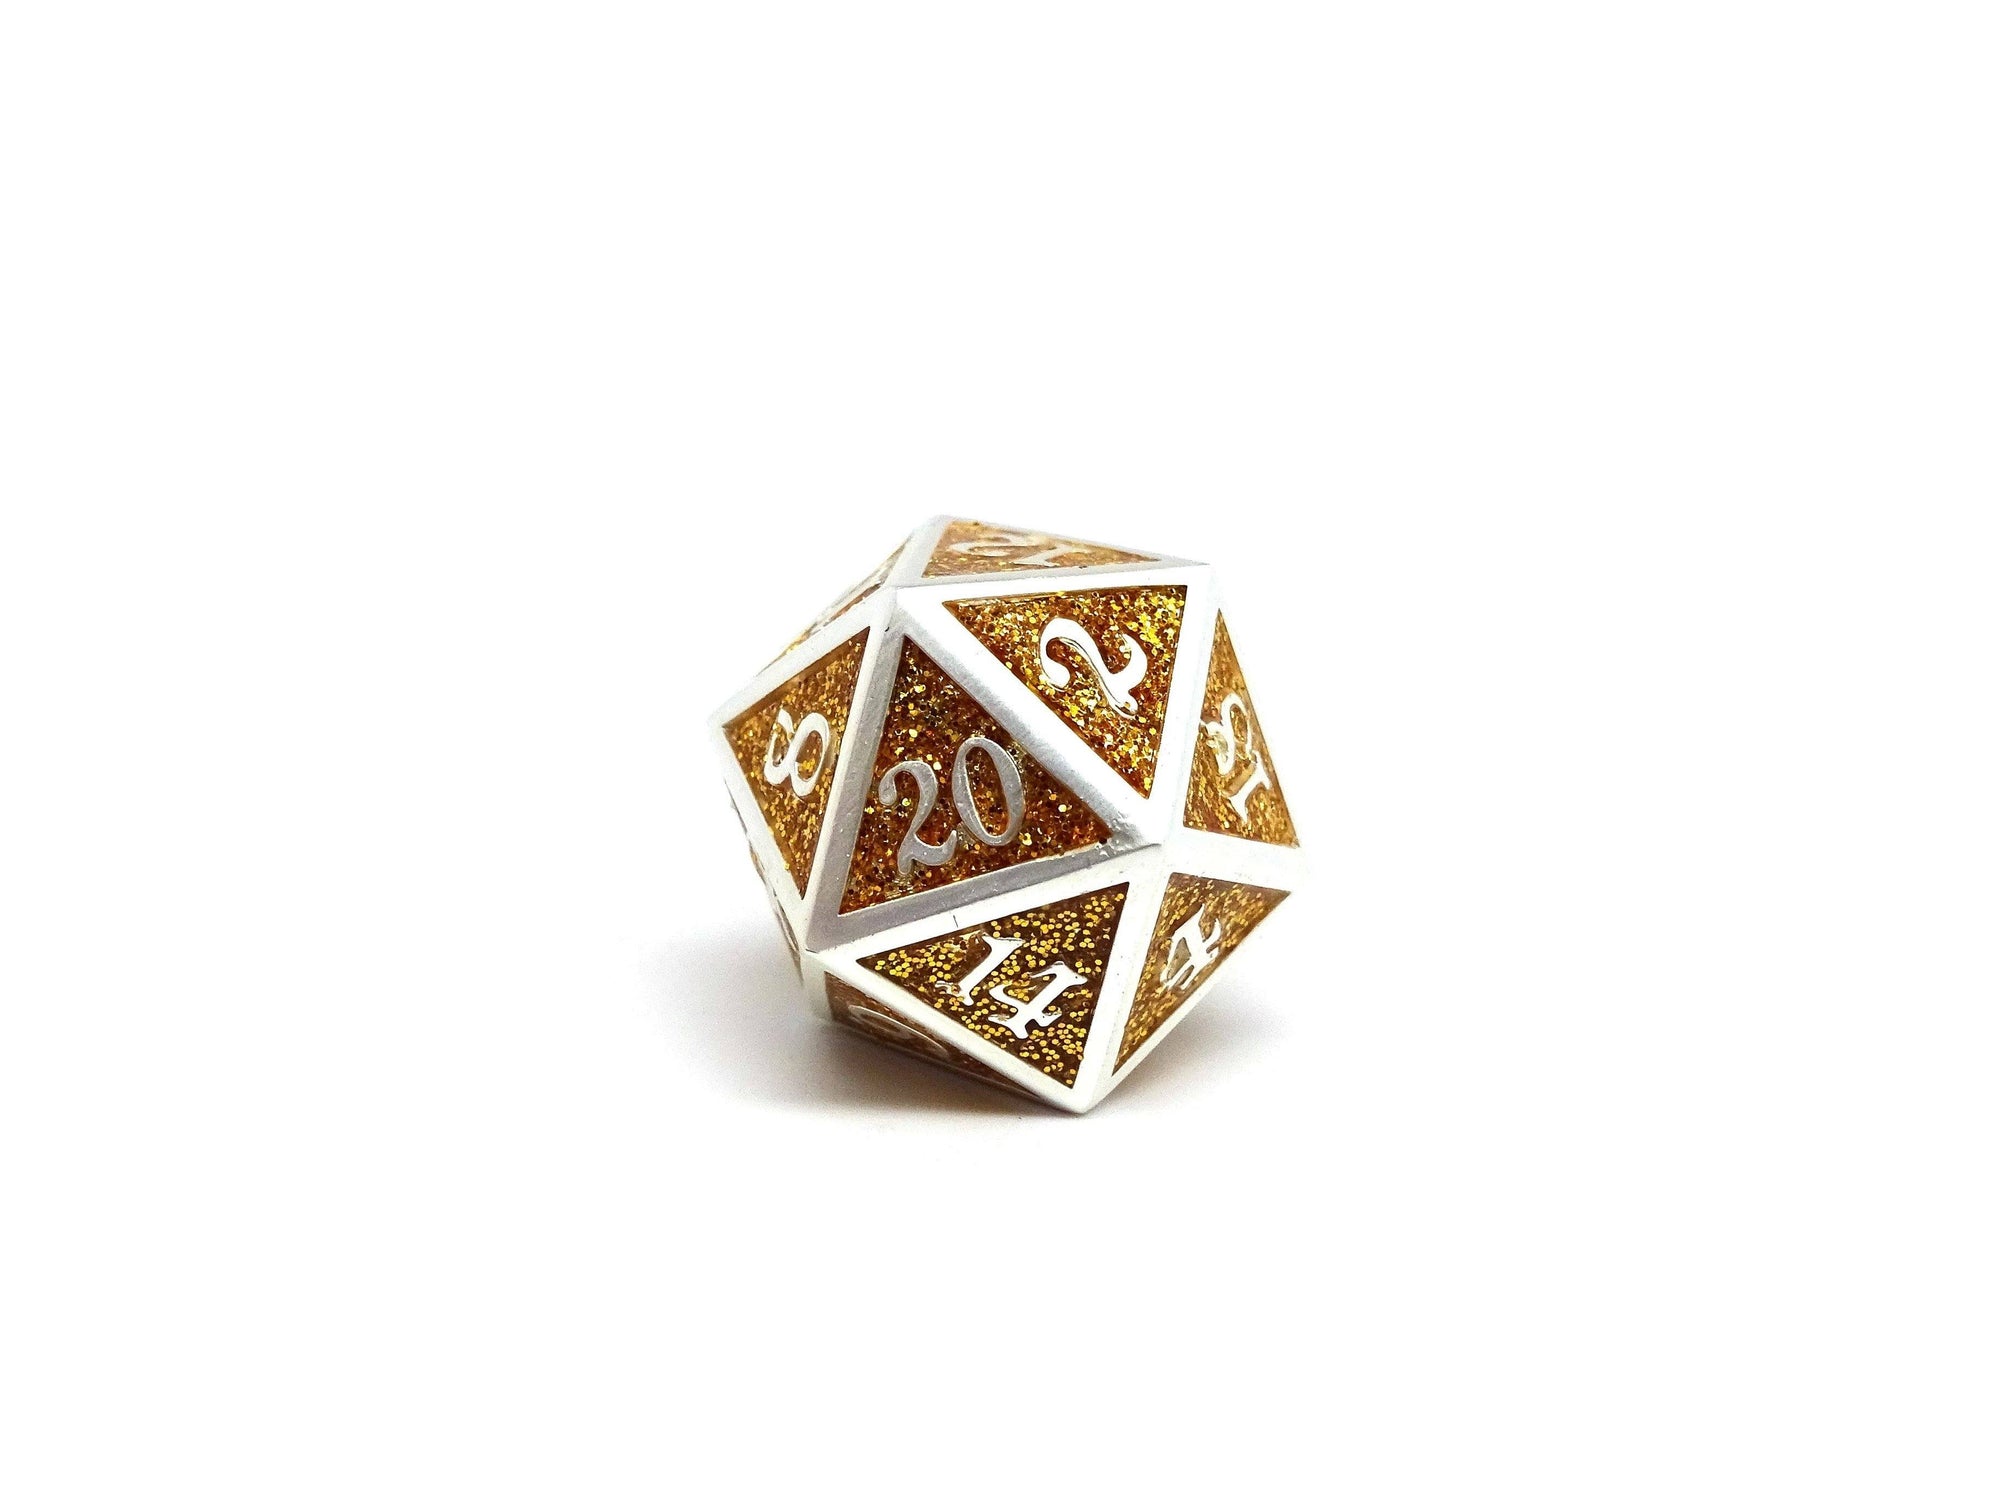 Heroic Dice of Metallic Luster - Single D20 Dice - Gold with Silver Font